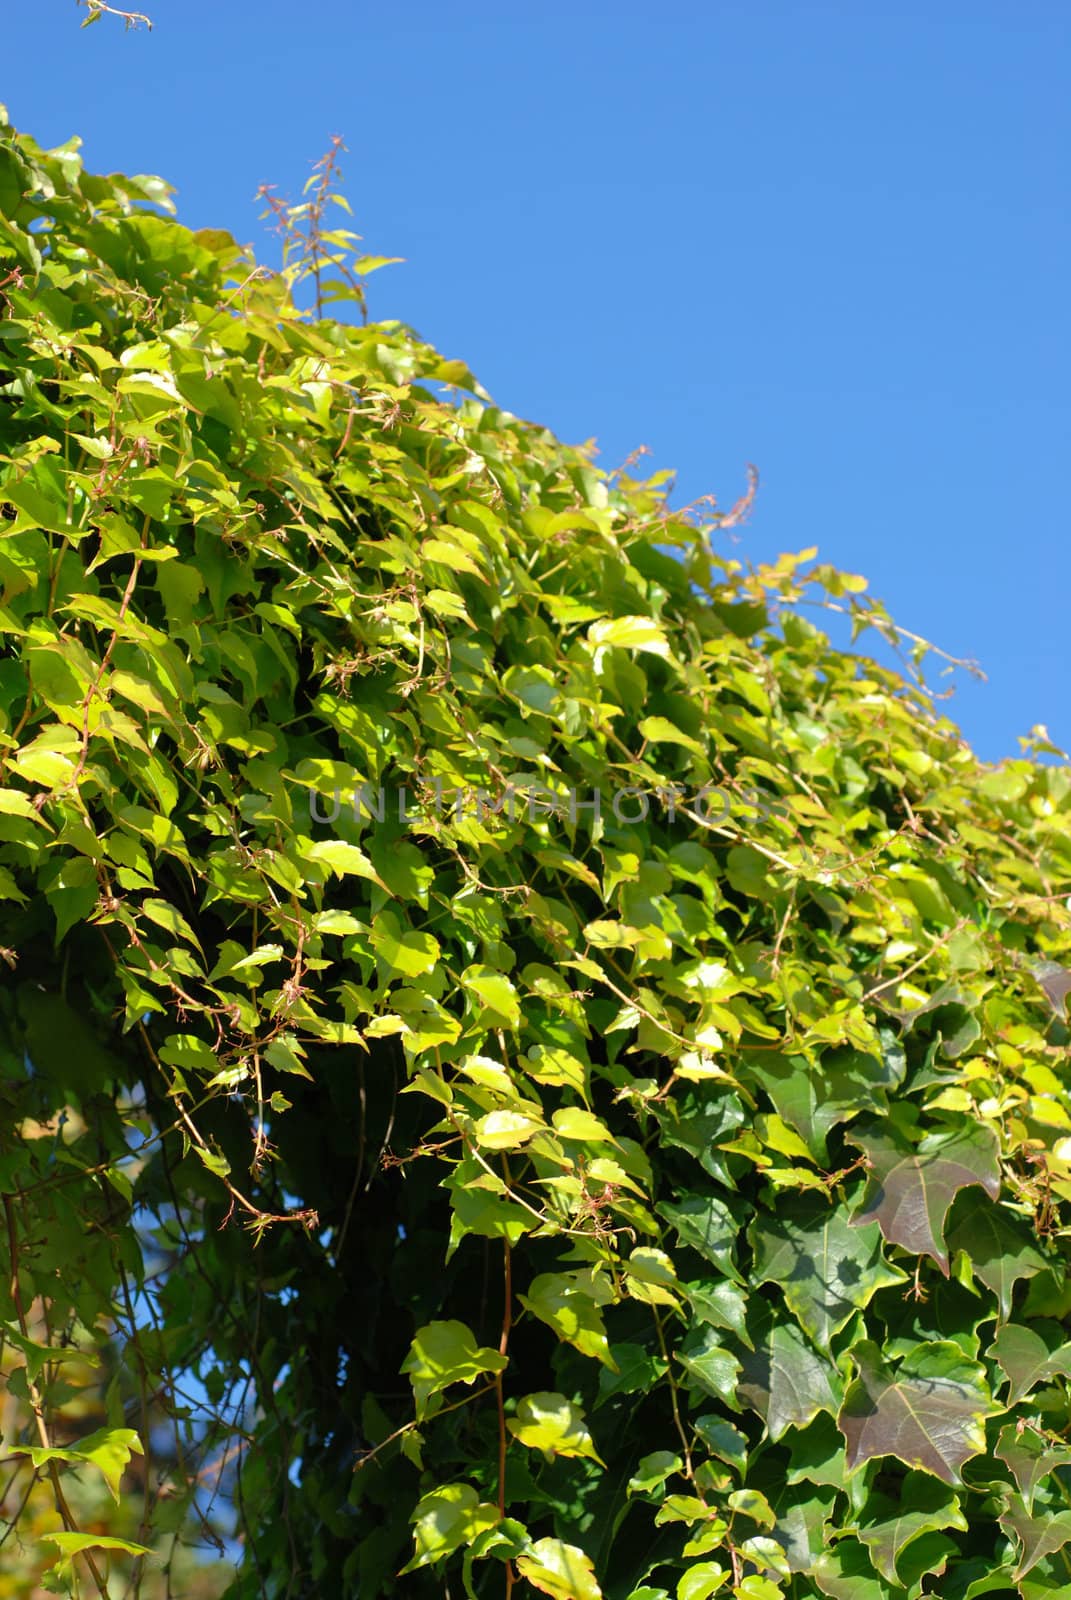 Ivy on the background of blue sky.